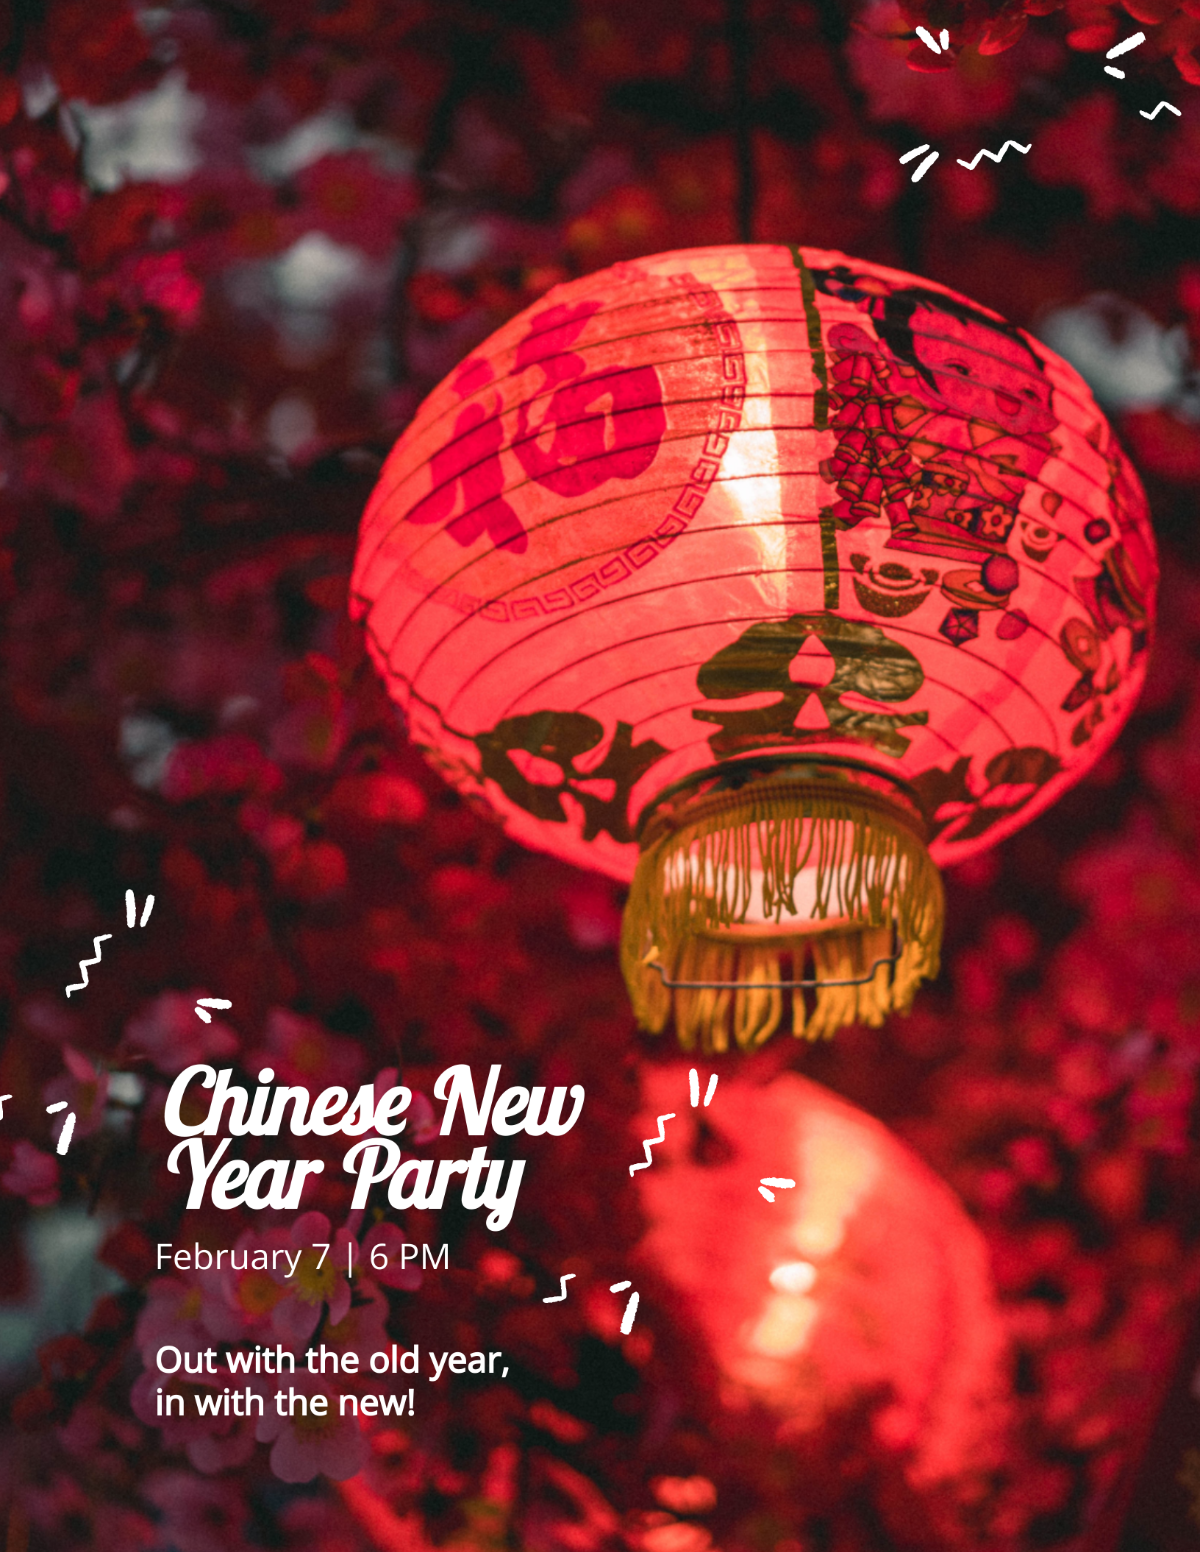 Chinese New Year Party Flyer Template